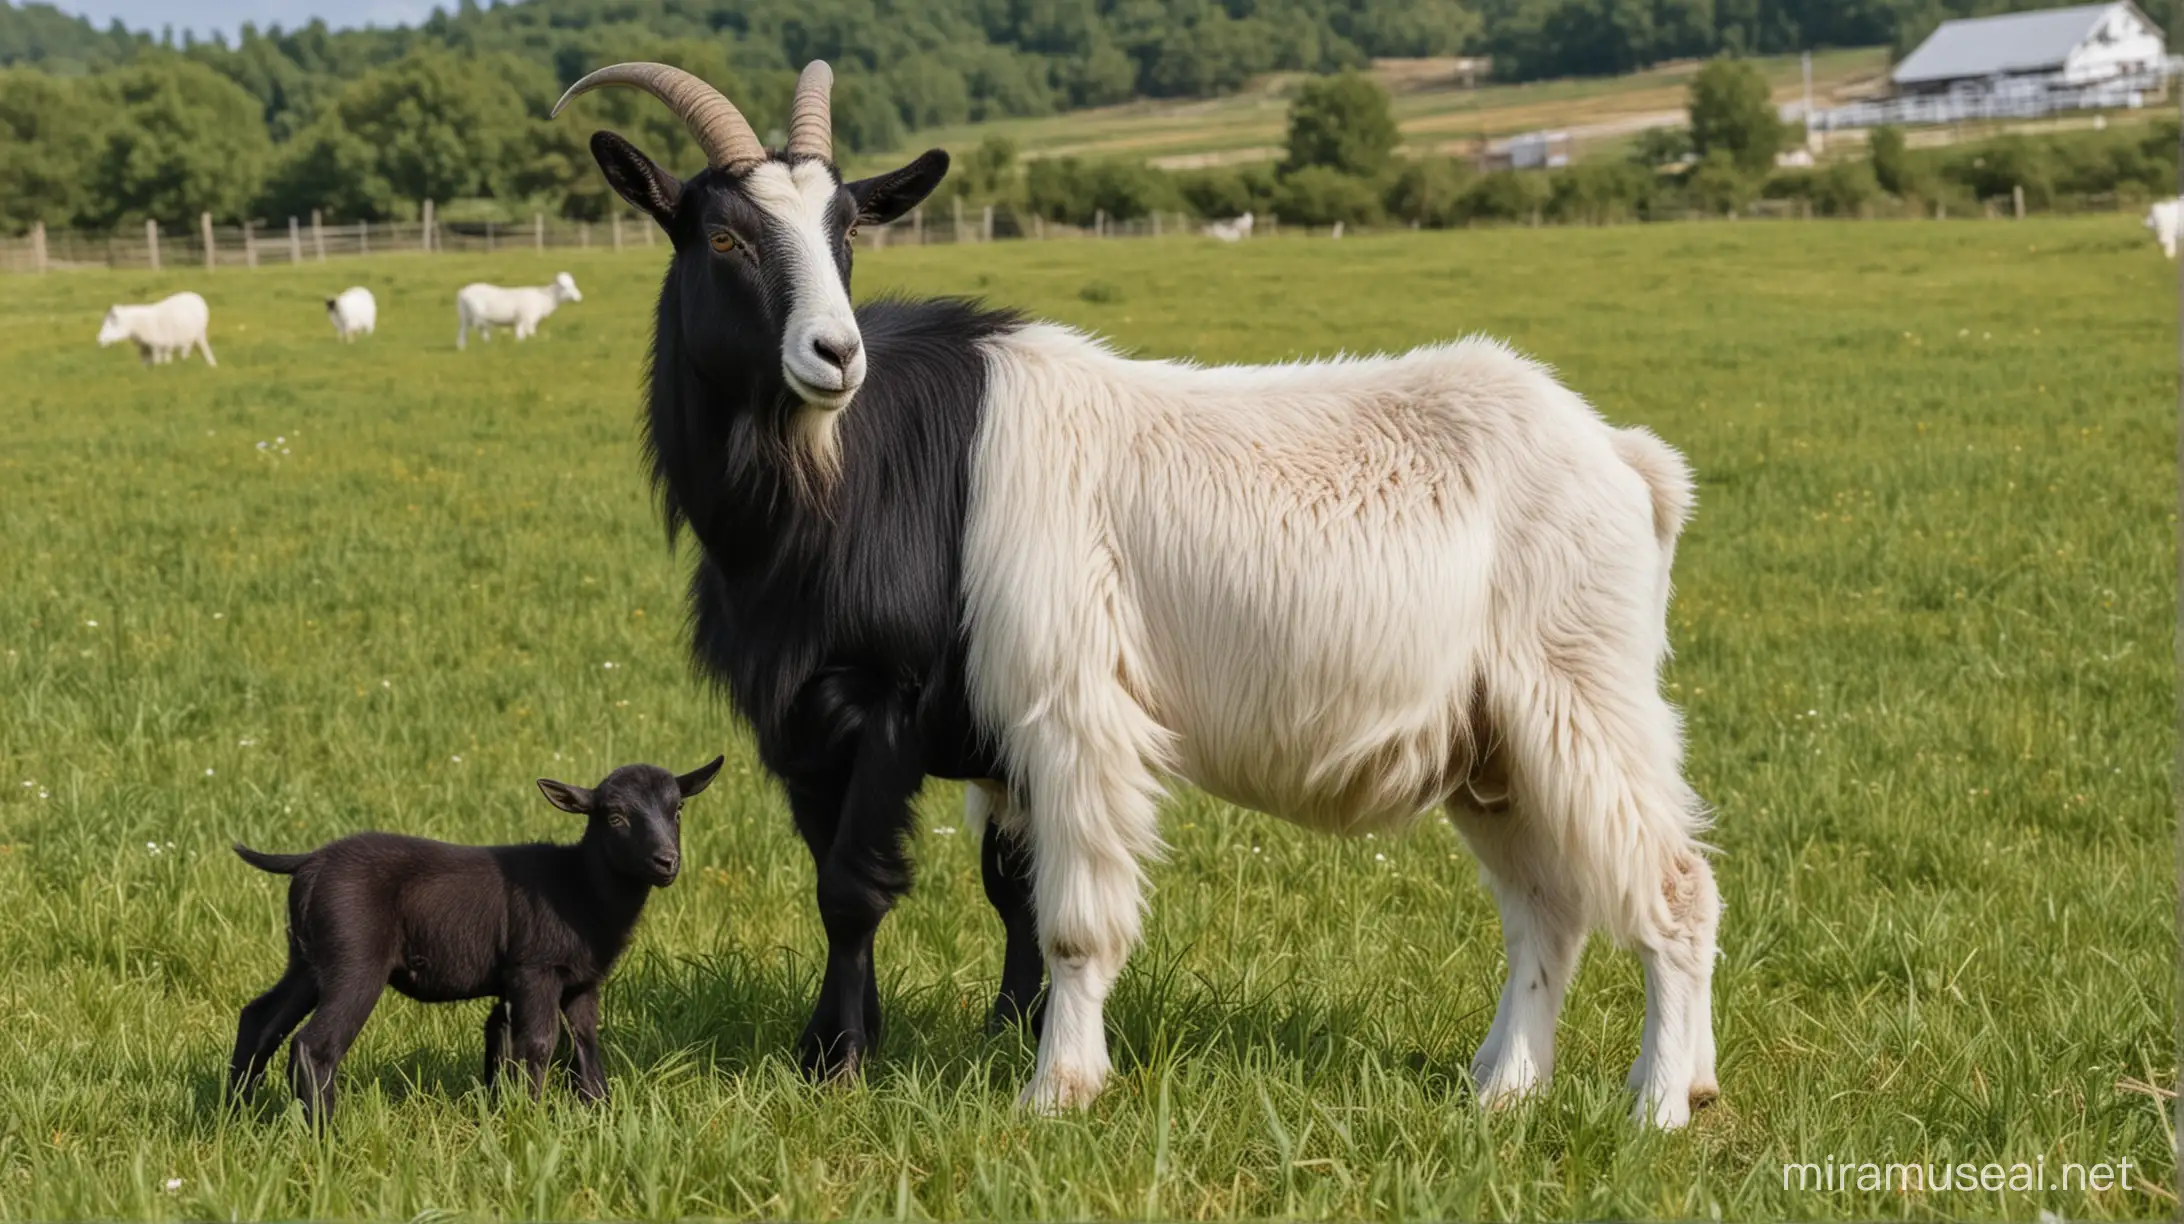   black mother goat with white parts, with black baby goat  in the fields